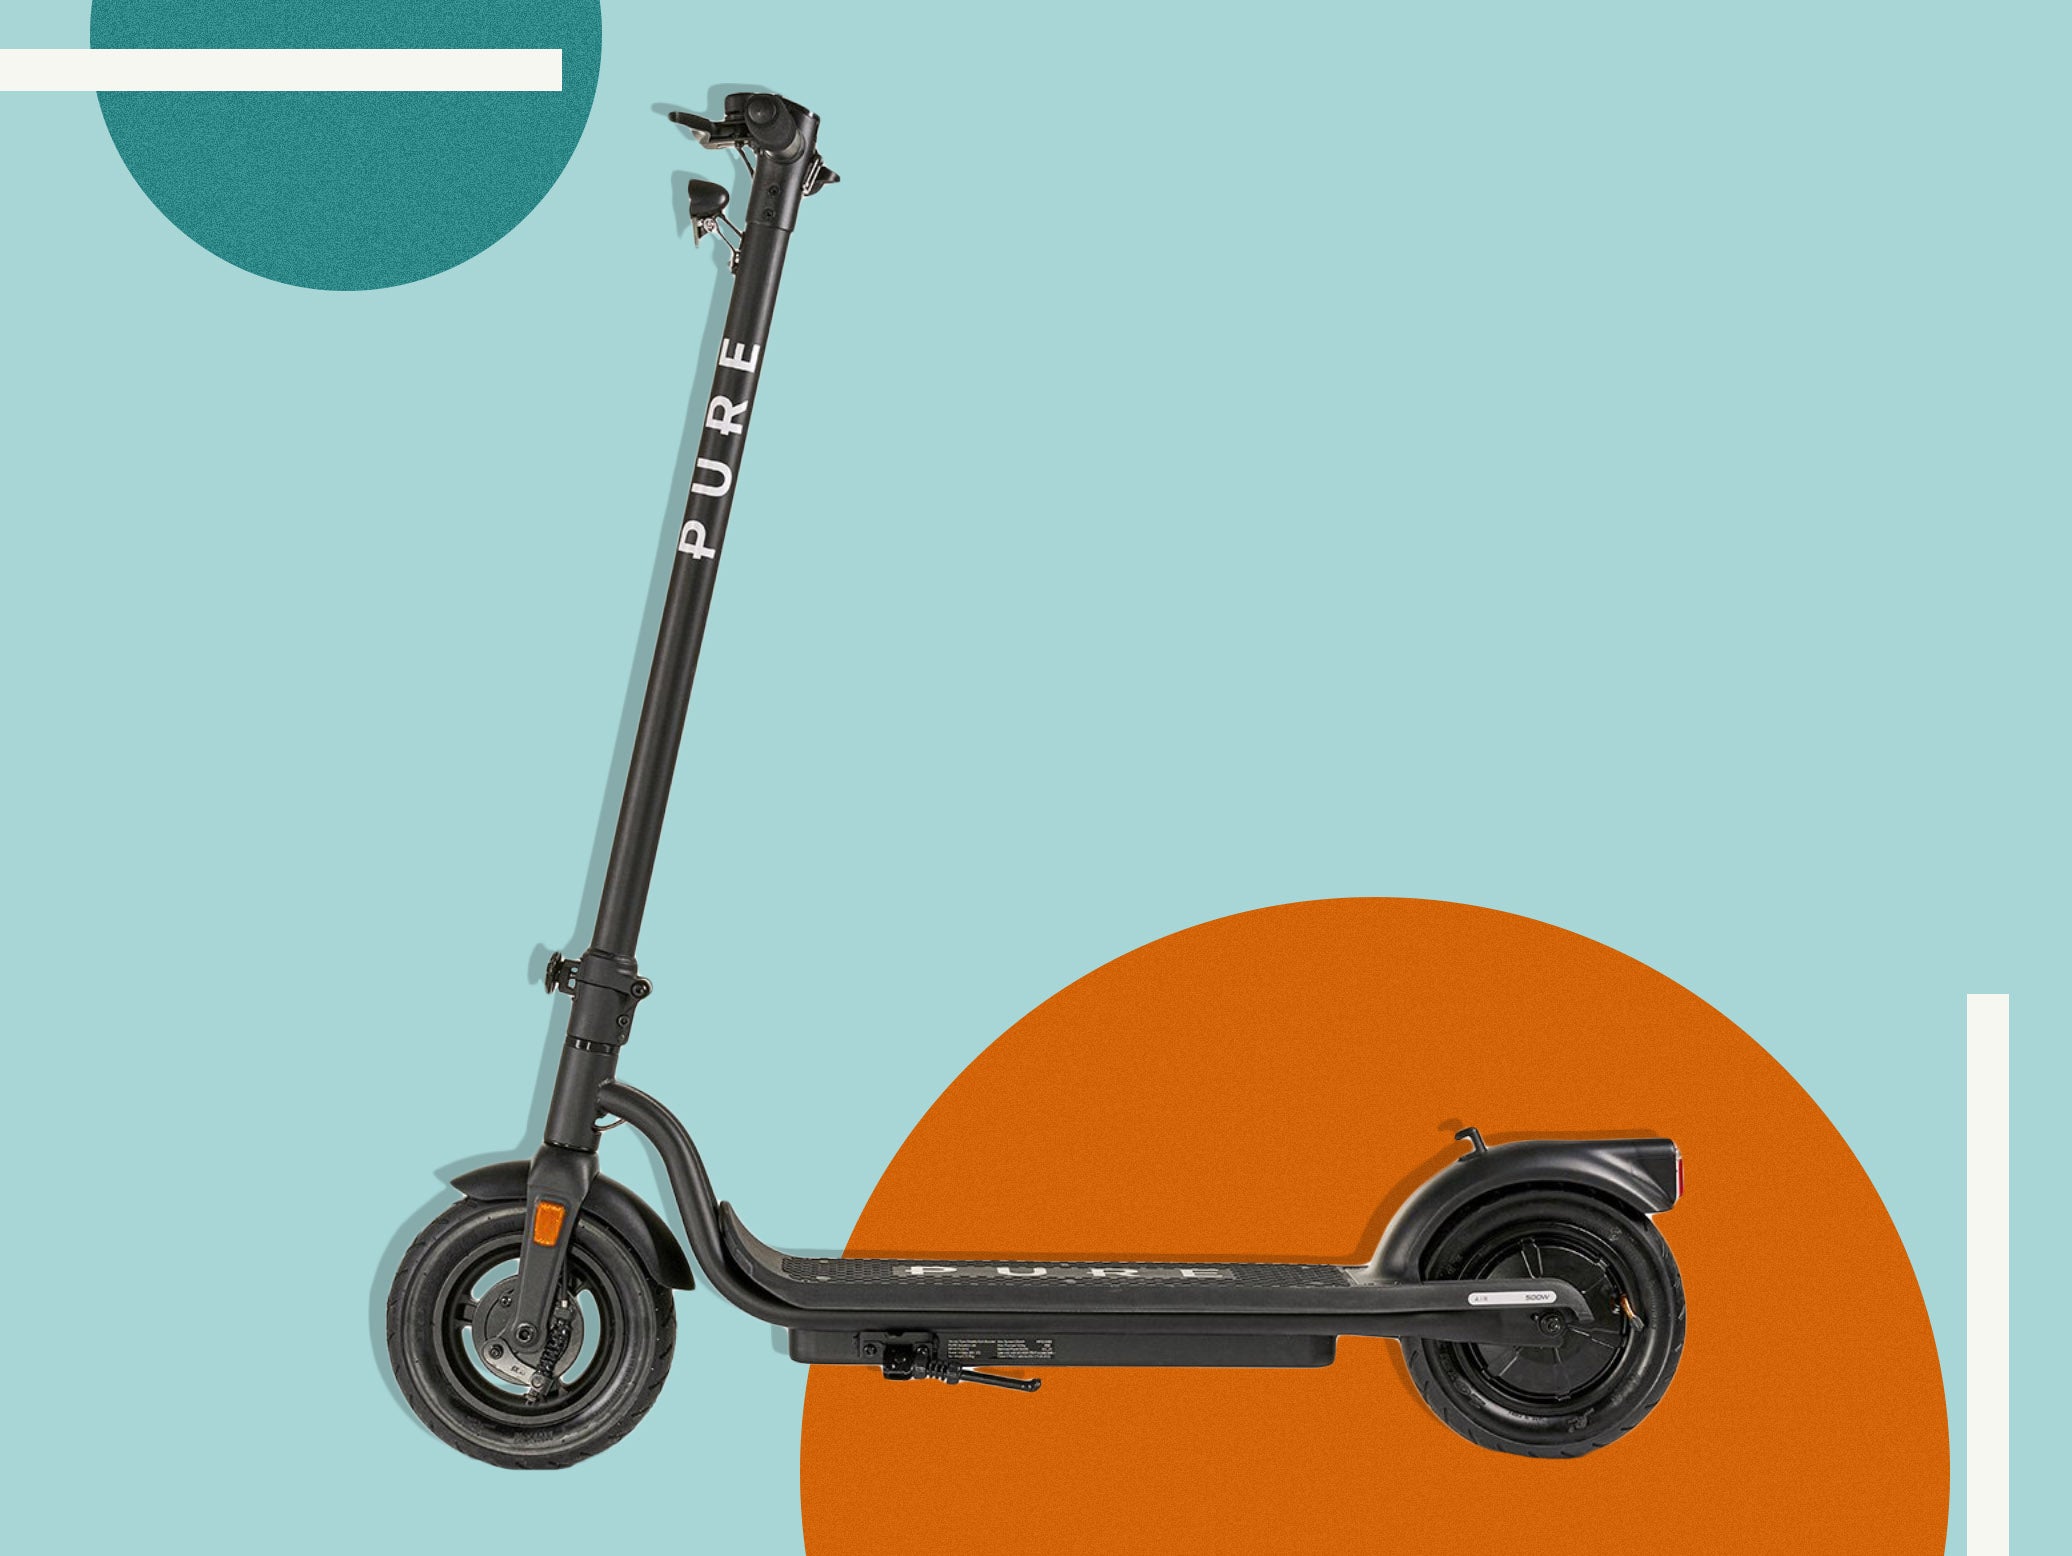 The new and improved Pure air electric scooter is water and weatherproof